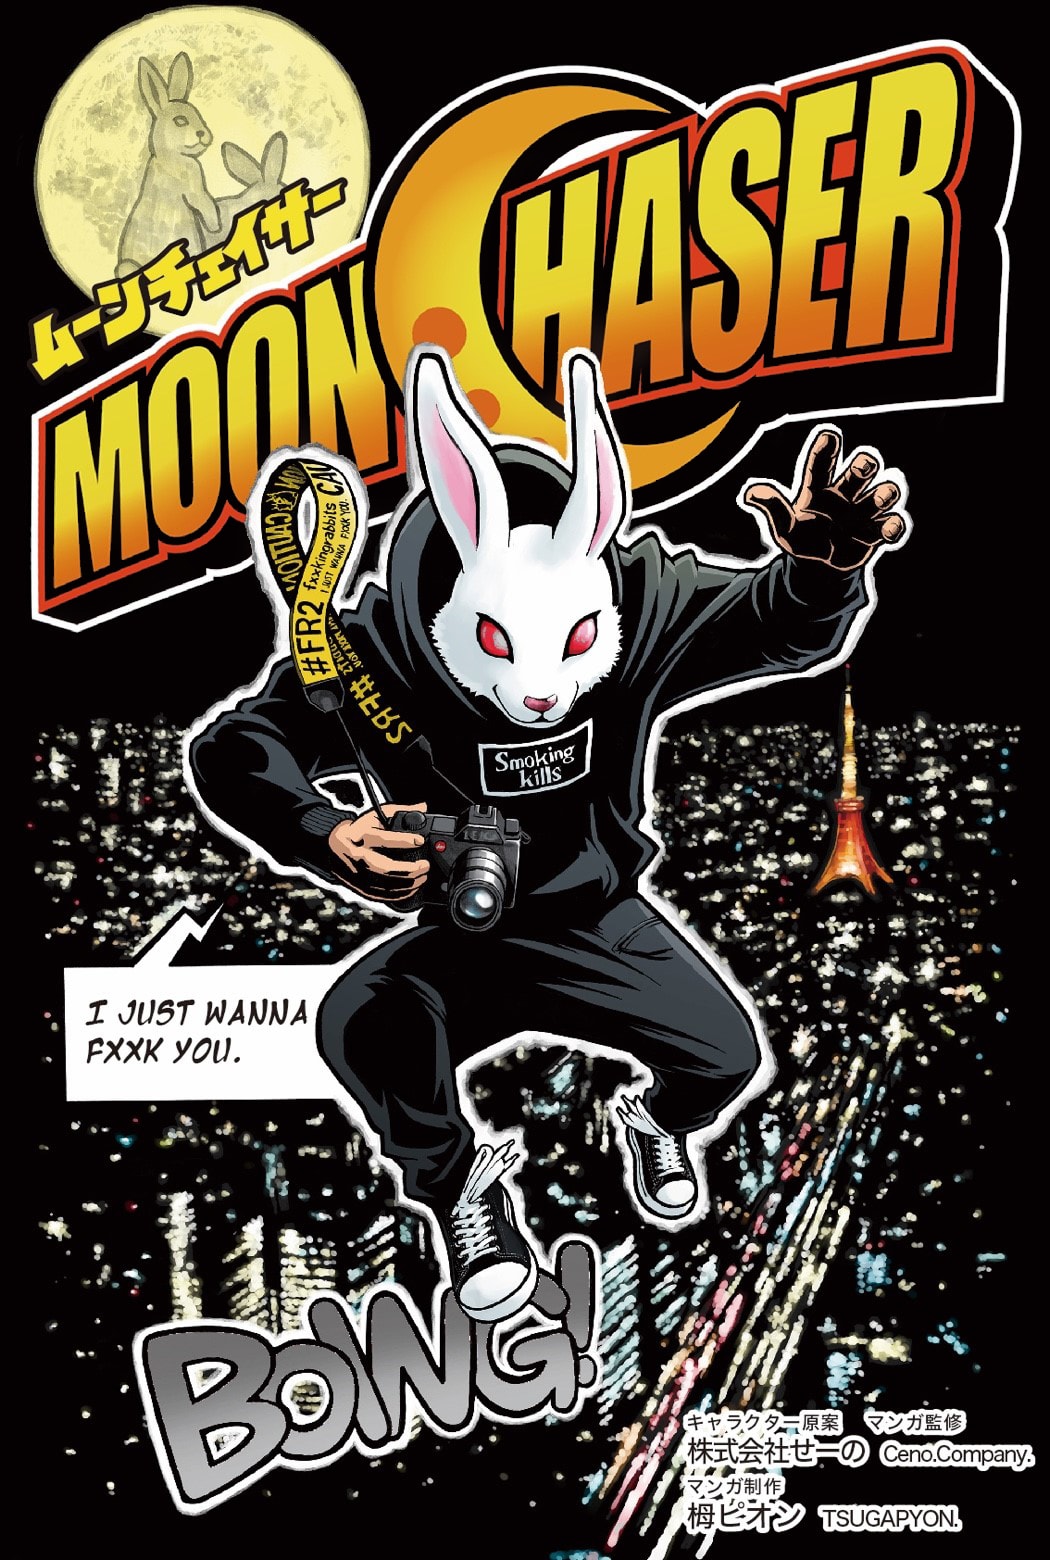 Fxxking Rabbits 推出網絡漫畫《MOON CHASER》